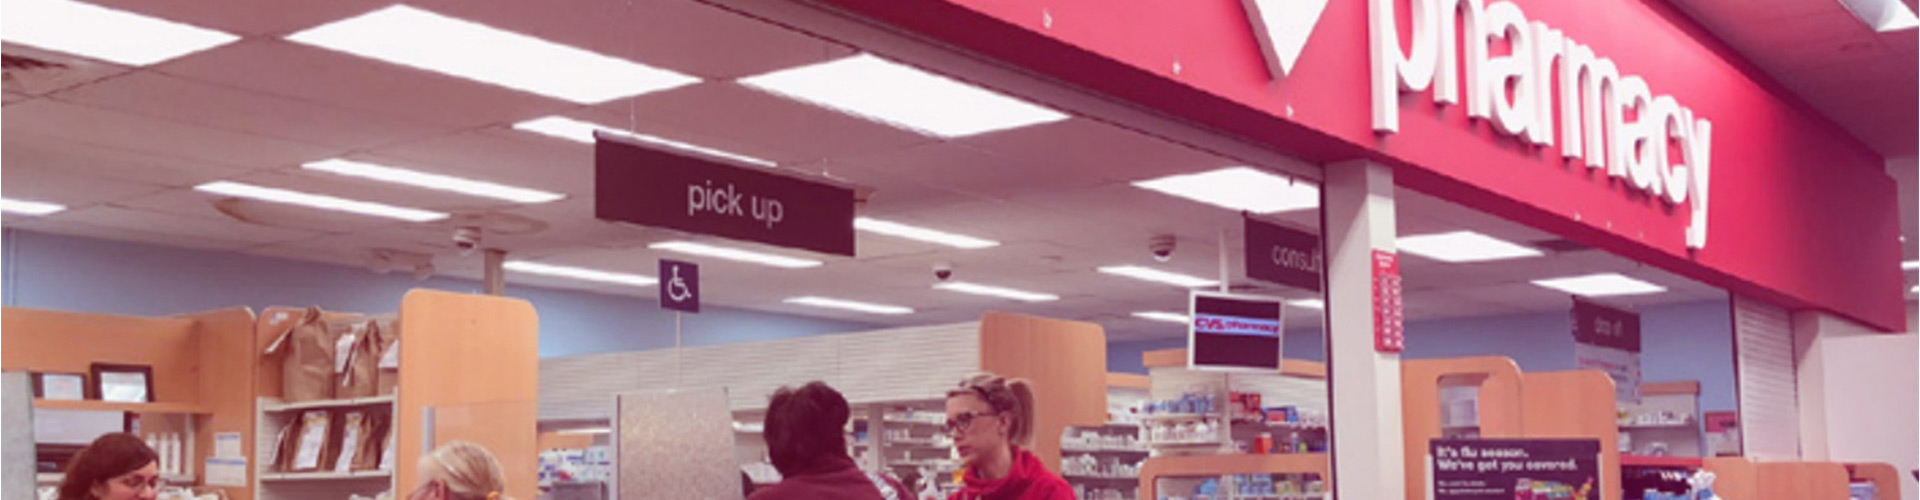 Blog banner featuring CVS pharmacy with employee and customer